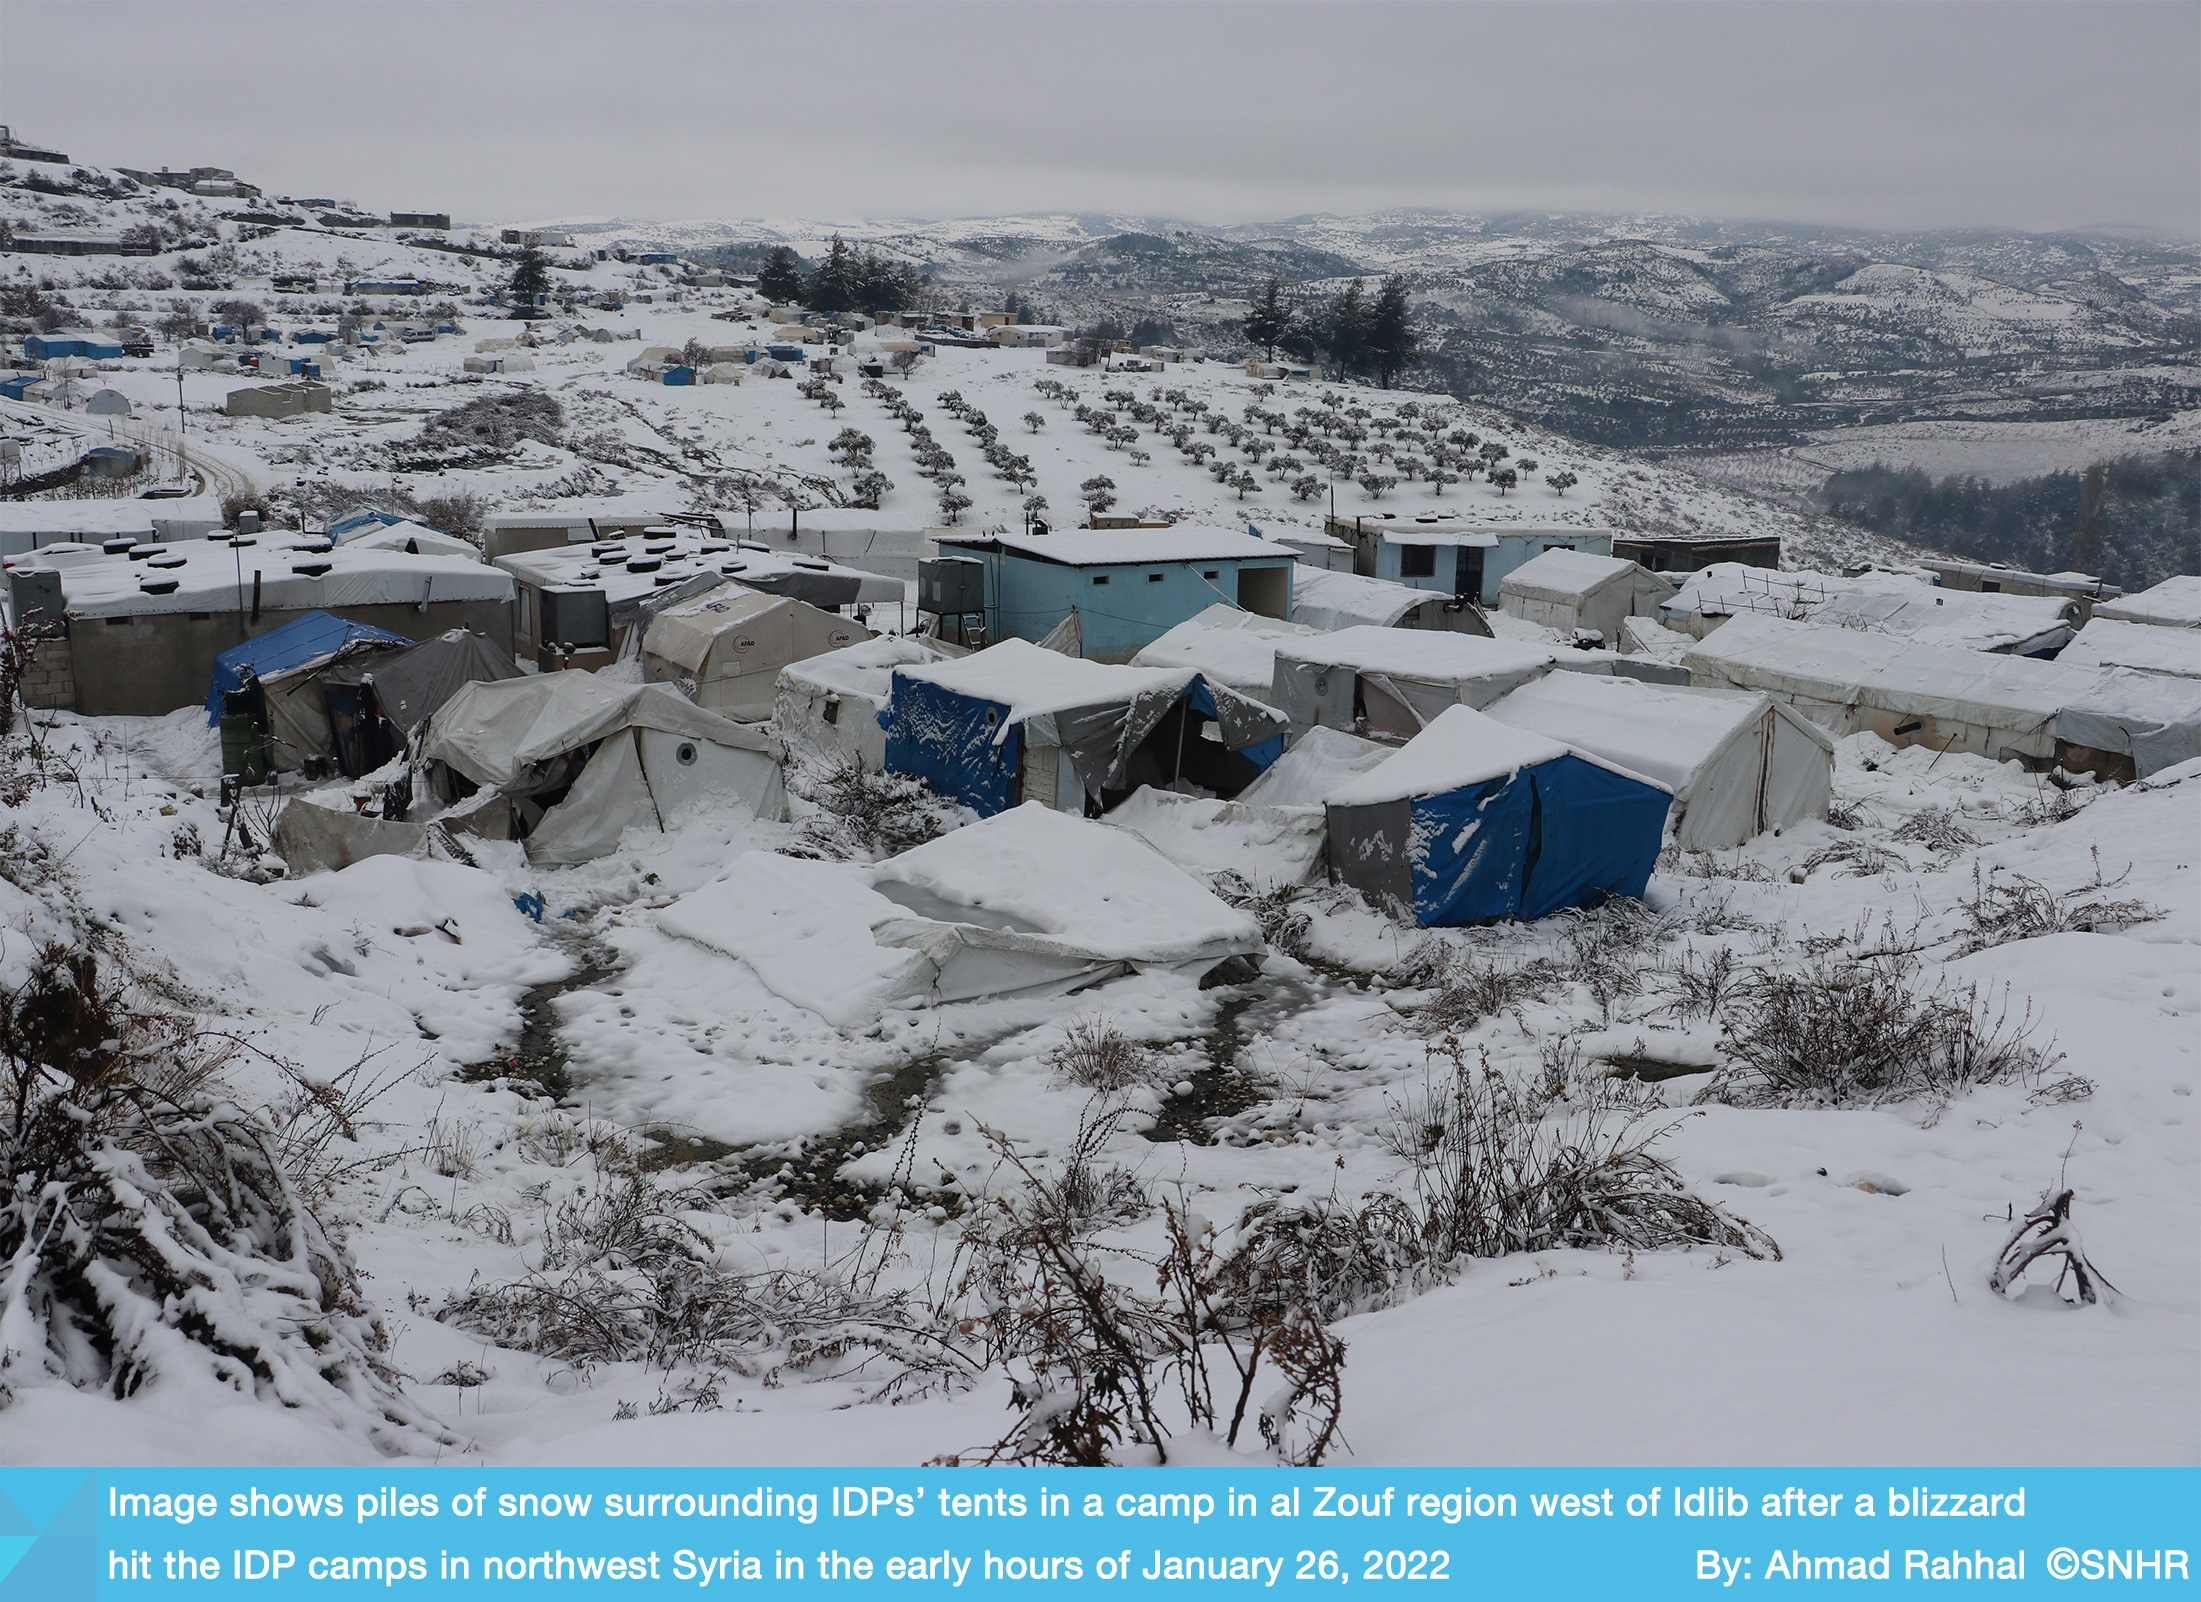 Exclusive image for SNHR shows piles of snow surrounding IDPs’ tents in a camp in west of Idlib 26-1-2022